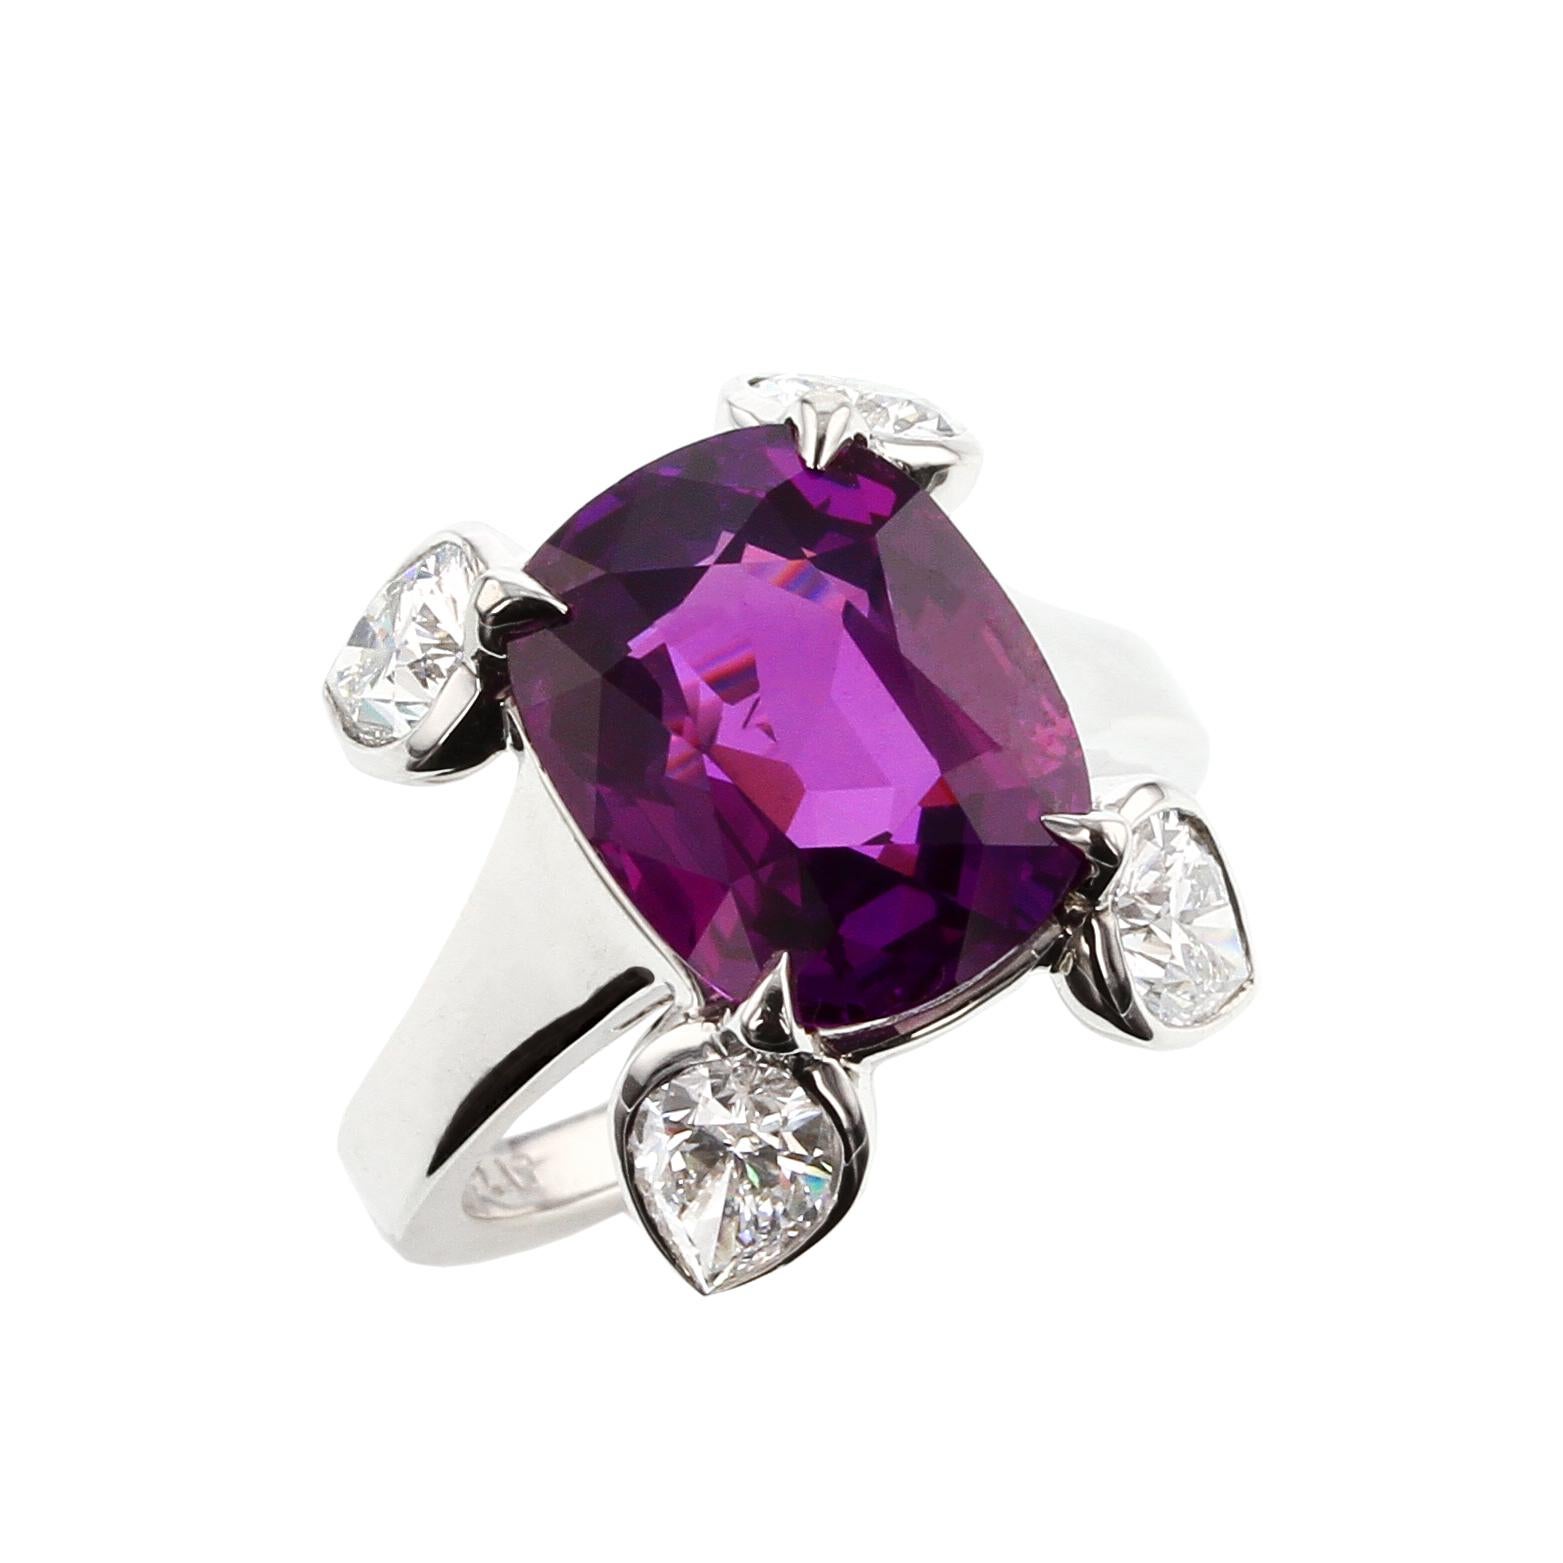 A beautiful and natural, no heat purple sapphire weighing 8.61 carats set with four pear-shape diamonds, set in Platinum. The sapphire accompanies a gemological certificate from GIA stating the origin as Ceylon (Sri Lanka) with No Indications of